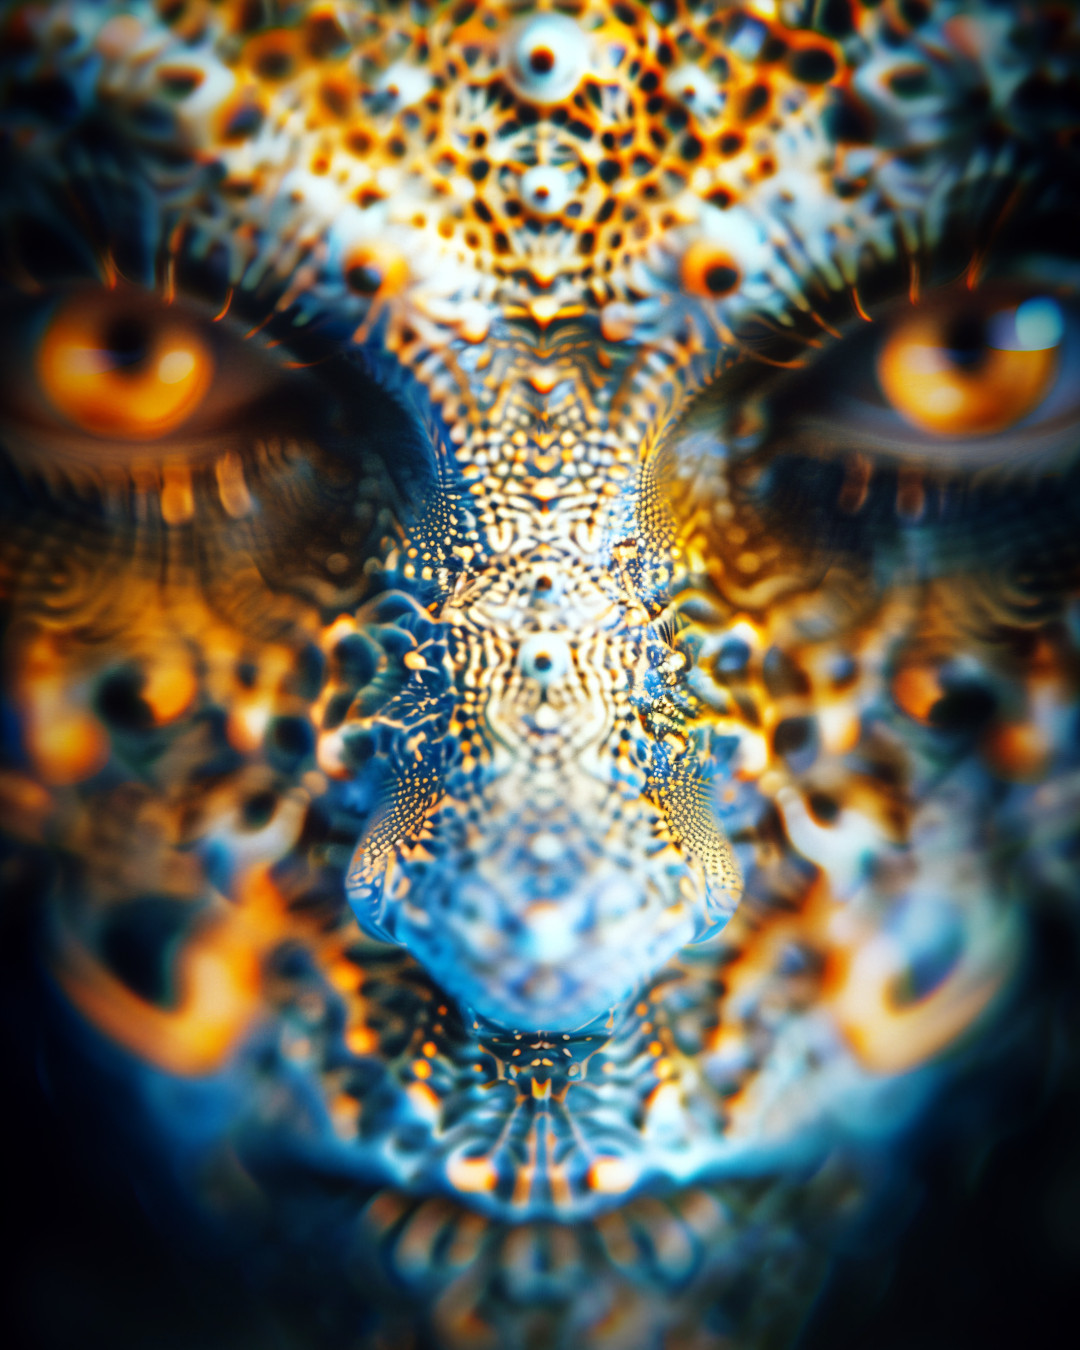 Close-up, alien creature with intricate patterns and depth of field